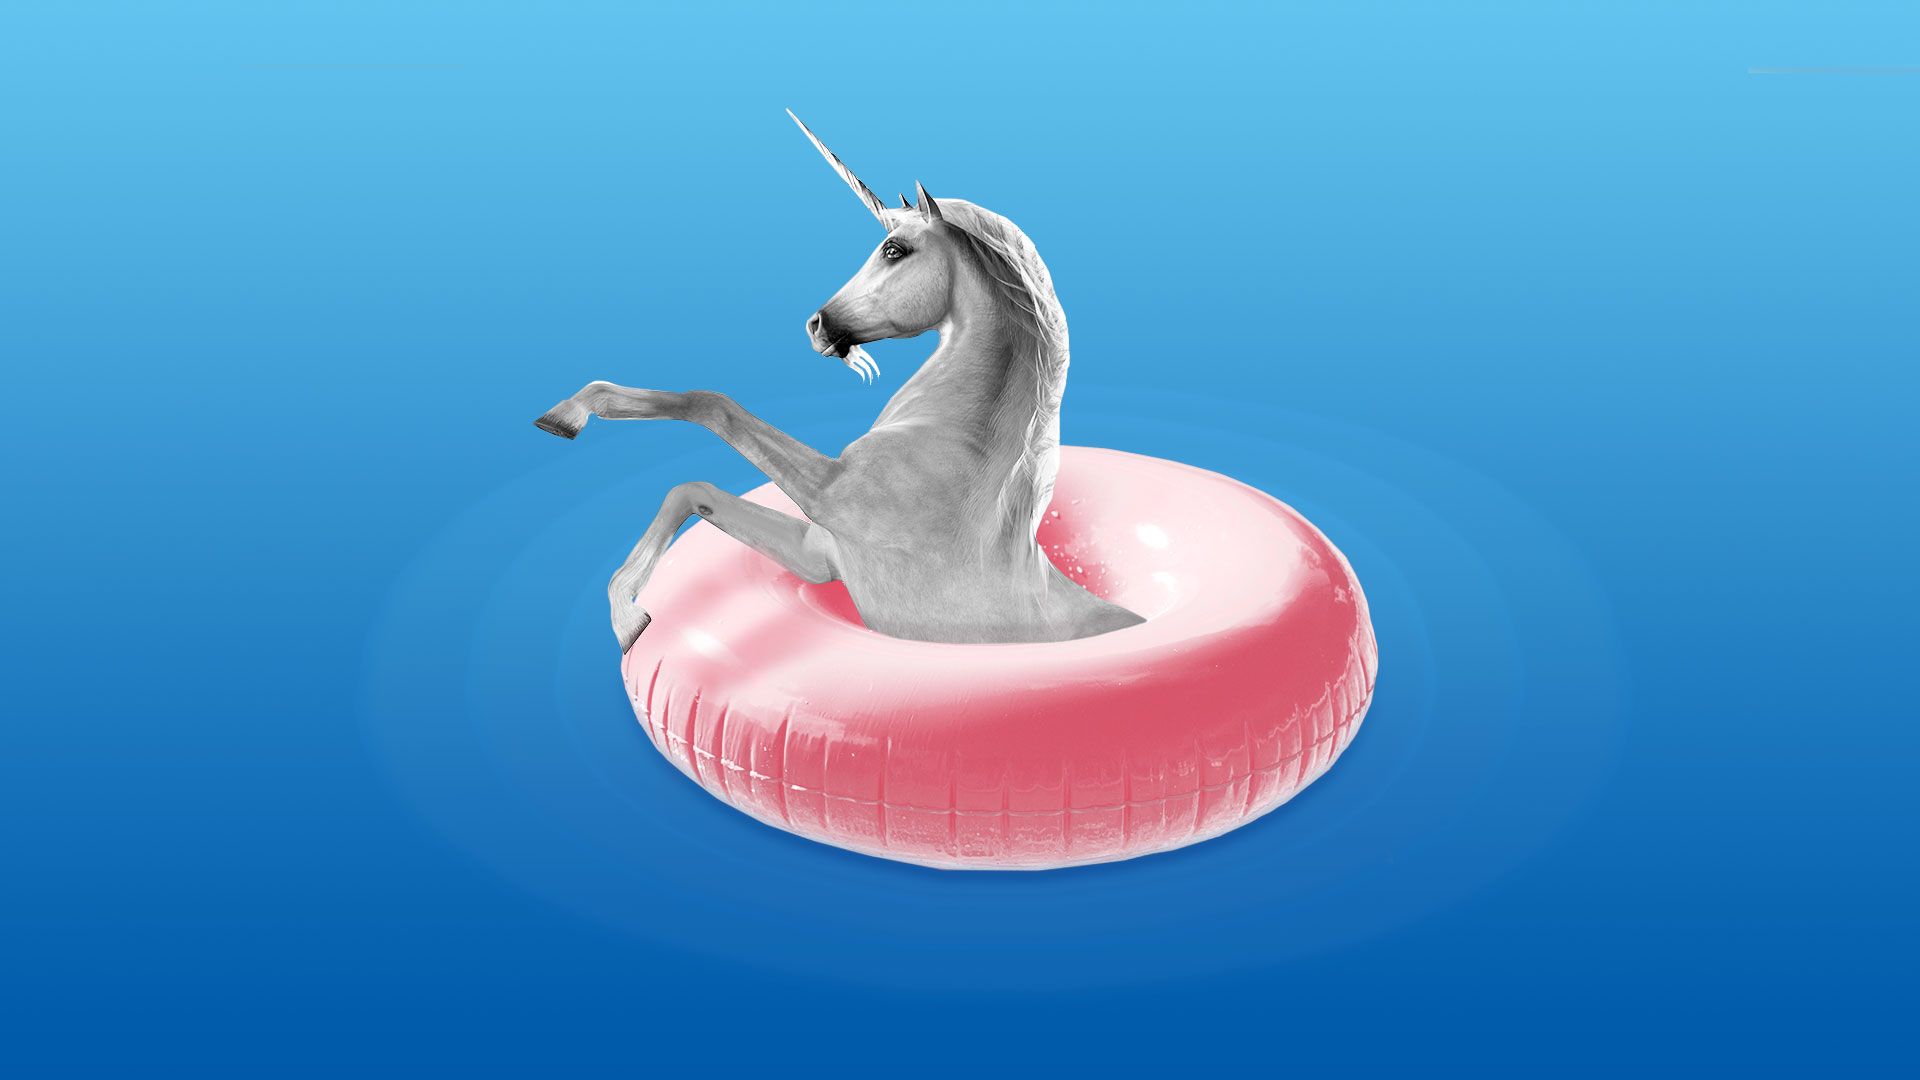 Illustration of a unicorn in water wearing a circle floating tube.